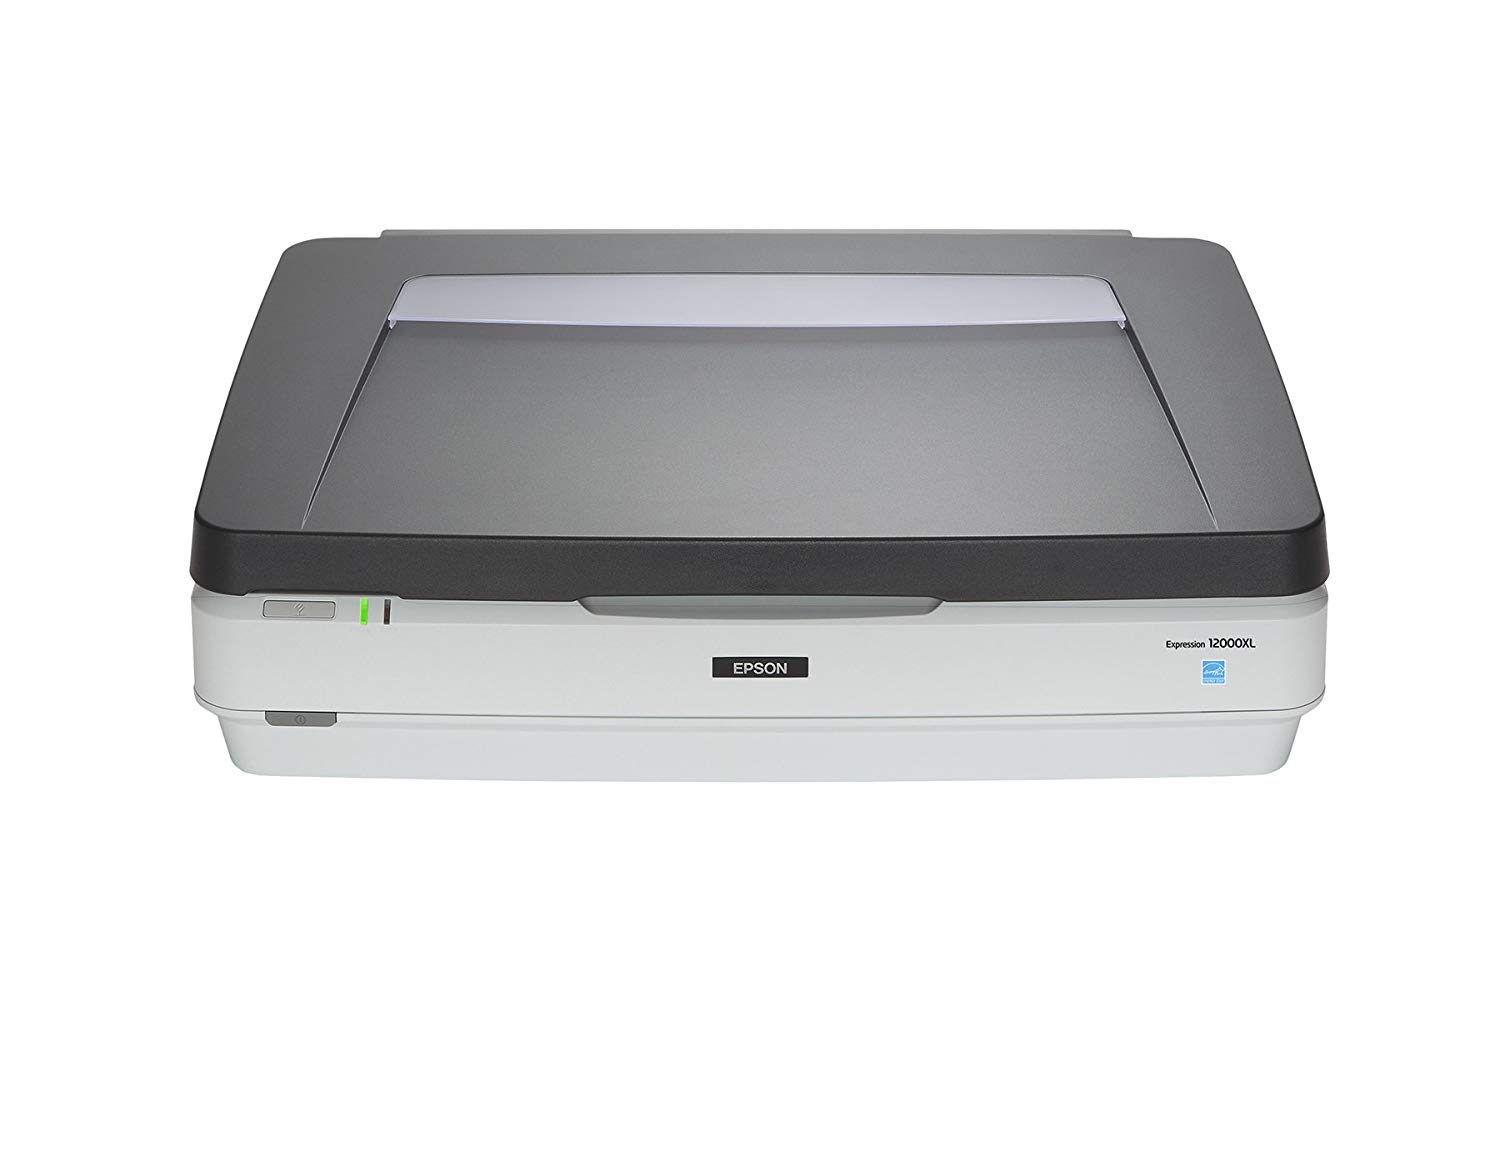 Epson Expression Flatbed Scanner, 12000XL-PH